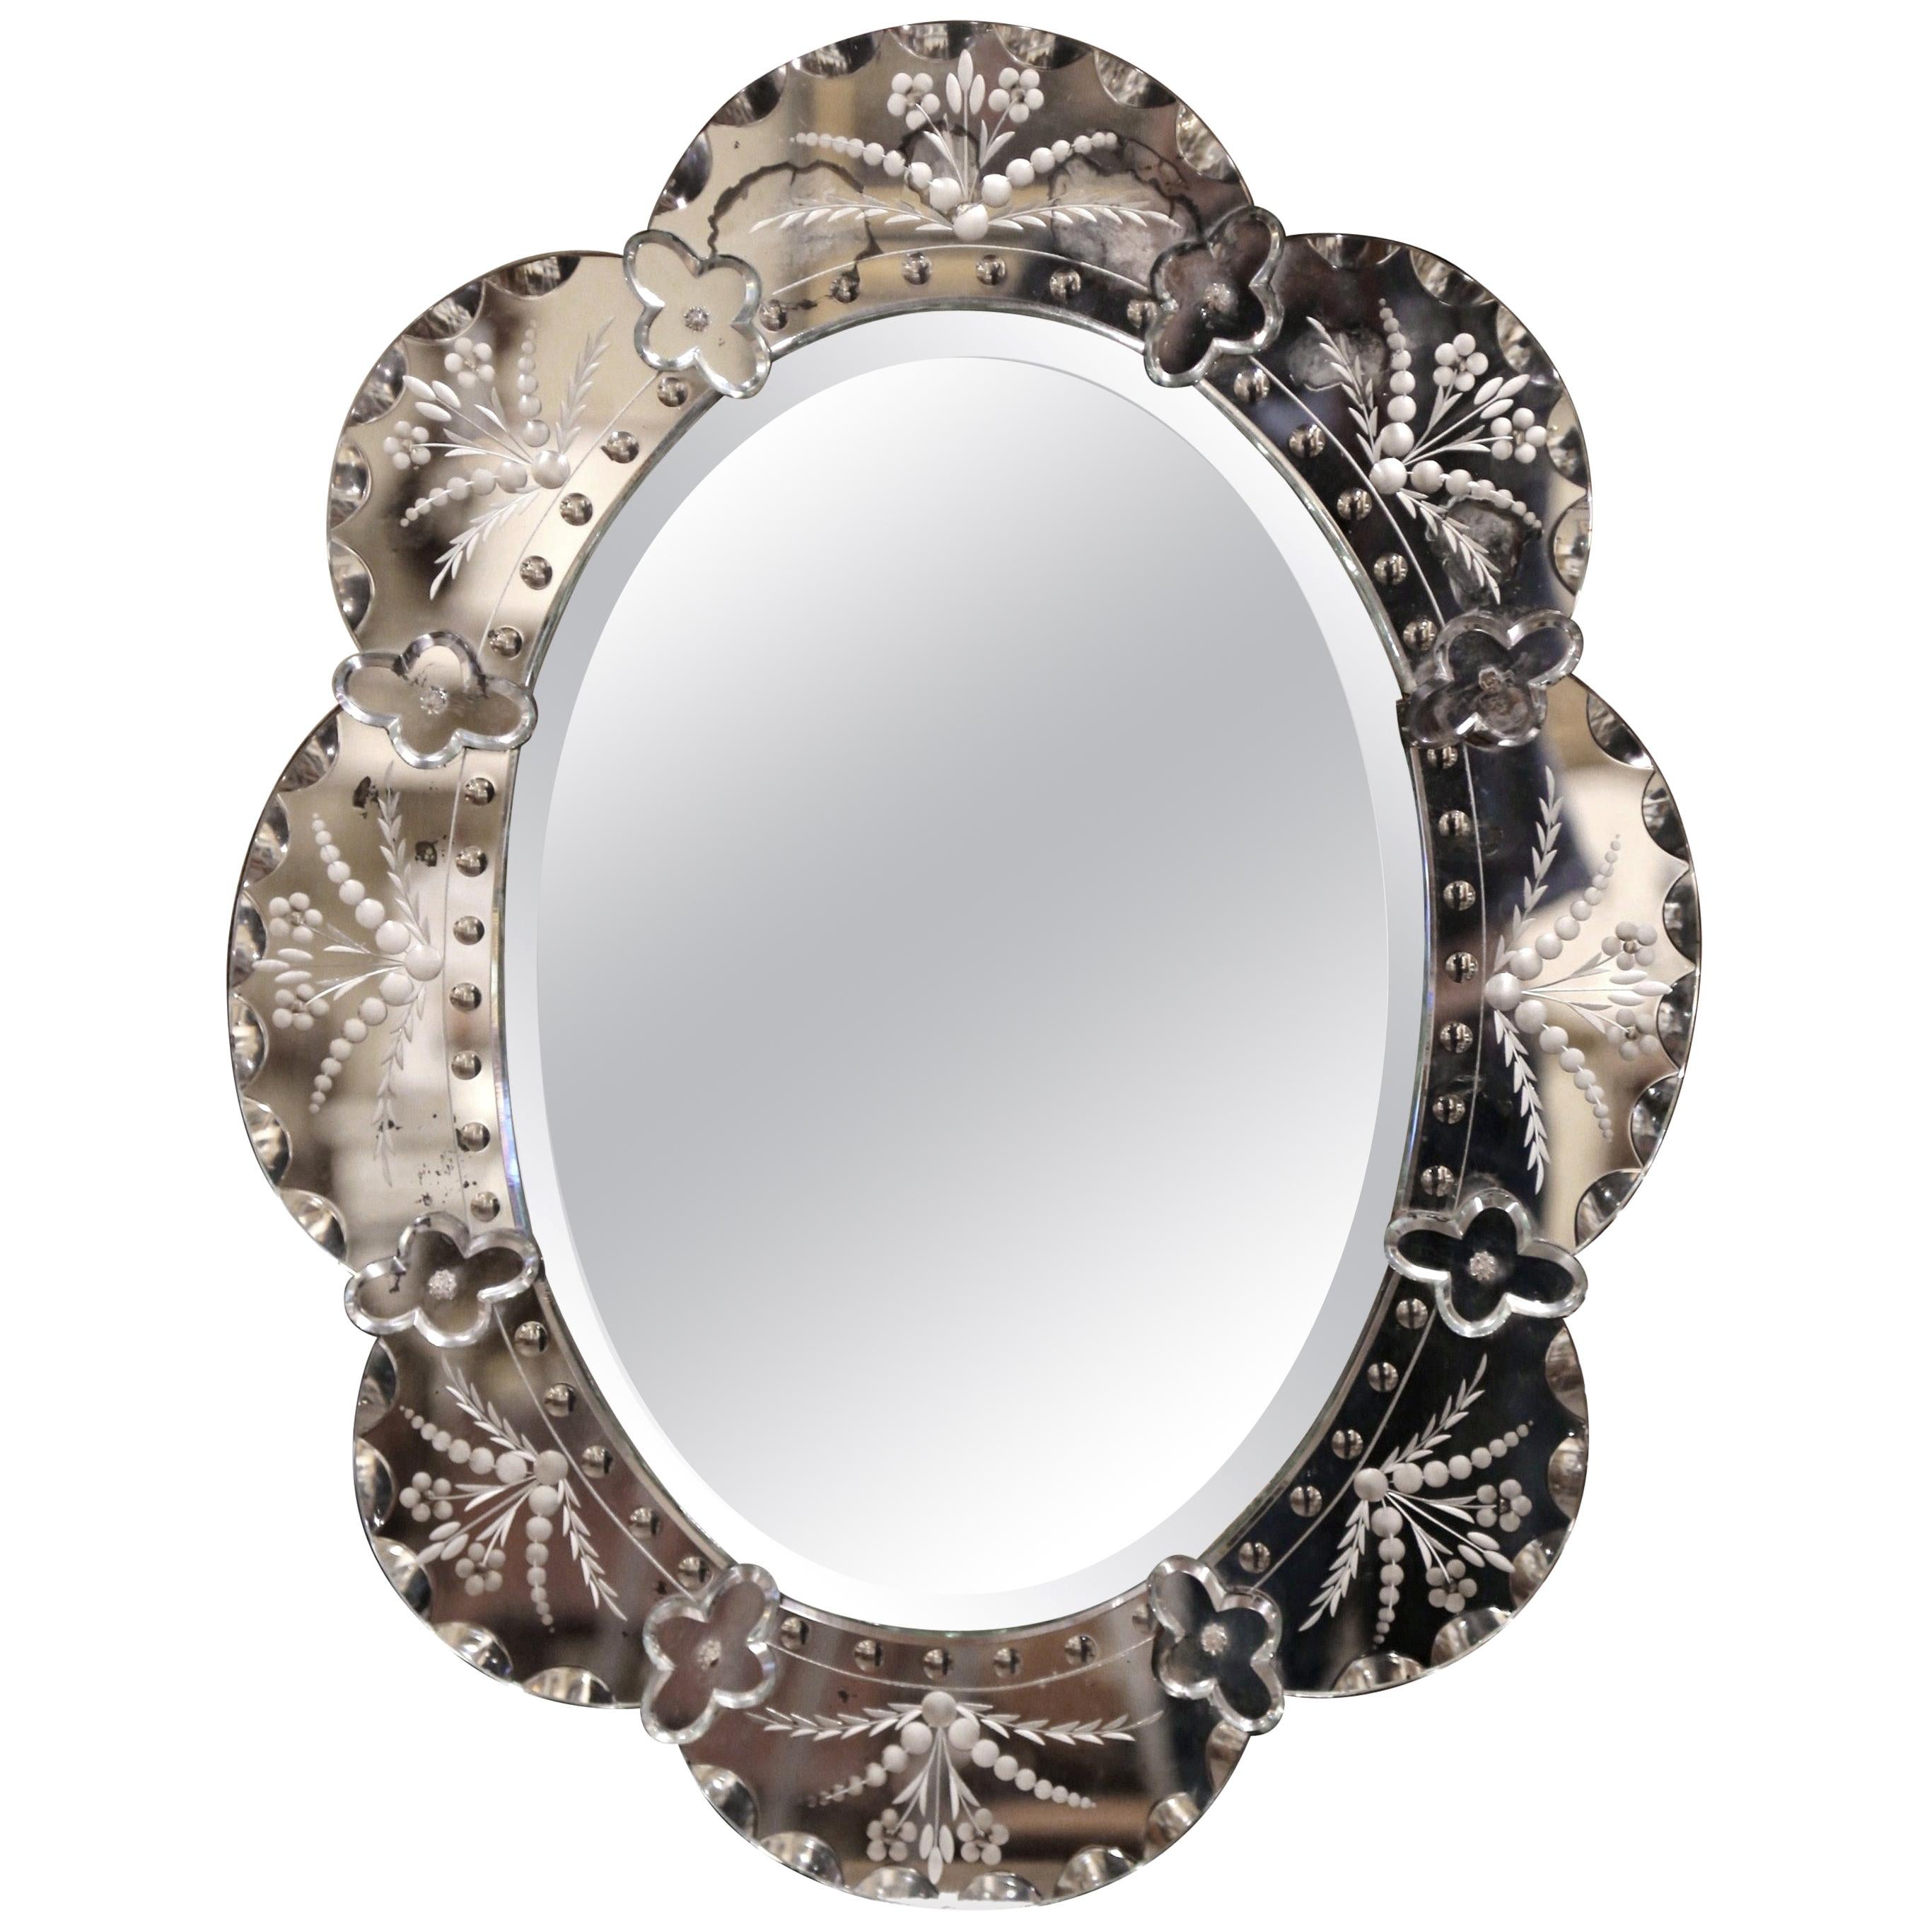 Mid-20th Century Italian Venetian Wall Mirror with Painted Floral Etching